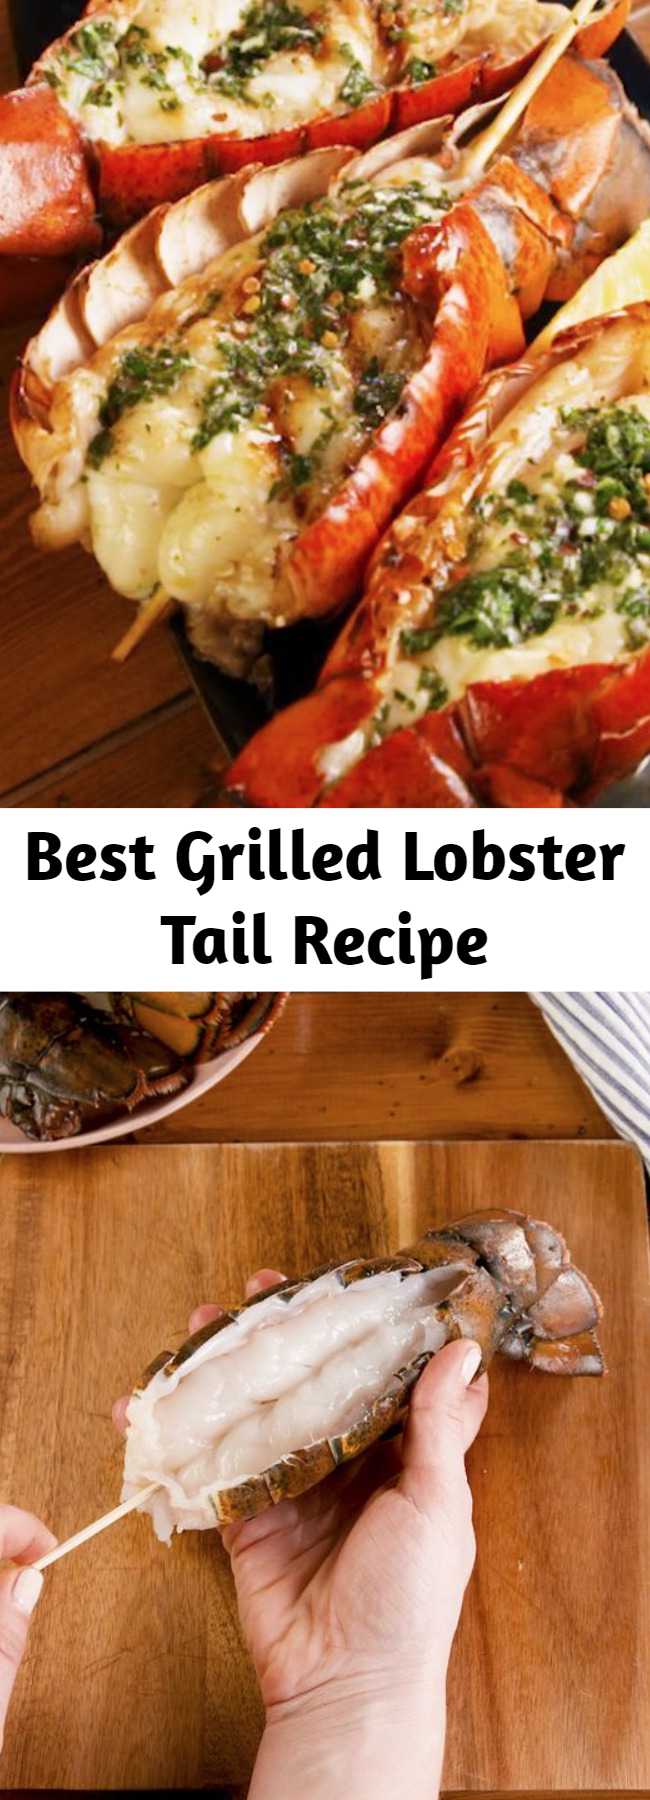 Best Grilled Lobster Tail Recipe - Lobster tail is kinda expensive, and therefore it seems pretty fancy. But it's actually incredibly easy to make. This recipe comes together in under 30 minutes and is the perfect dinner to make for a special occasion. The herb butter is PERFECT. #grilledlobster #lobstertail #howtogrilllobster #grilling #seafood #lobster